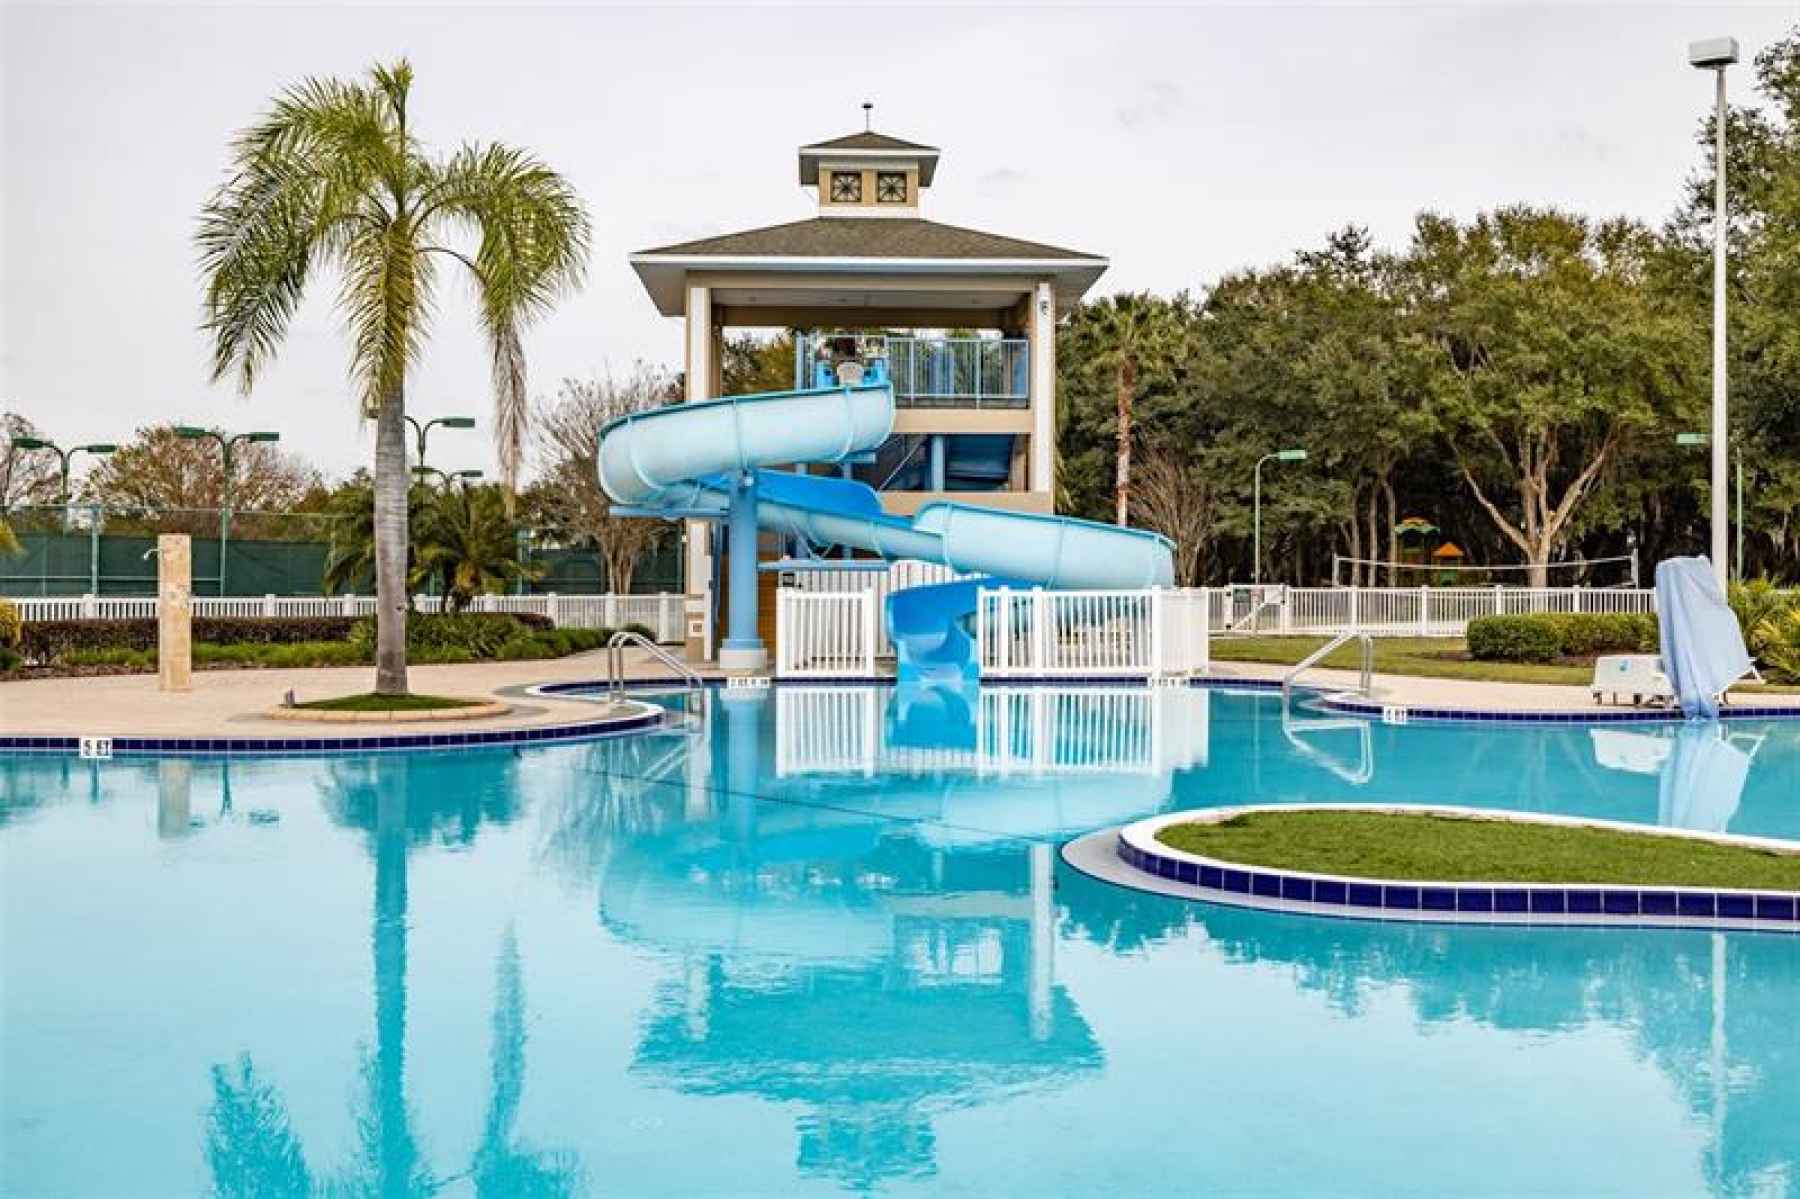 Resort style pool with slide